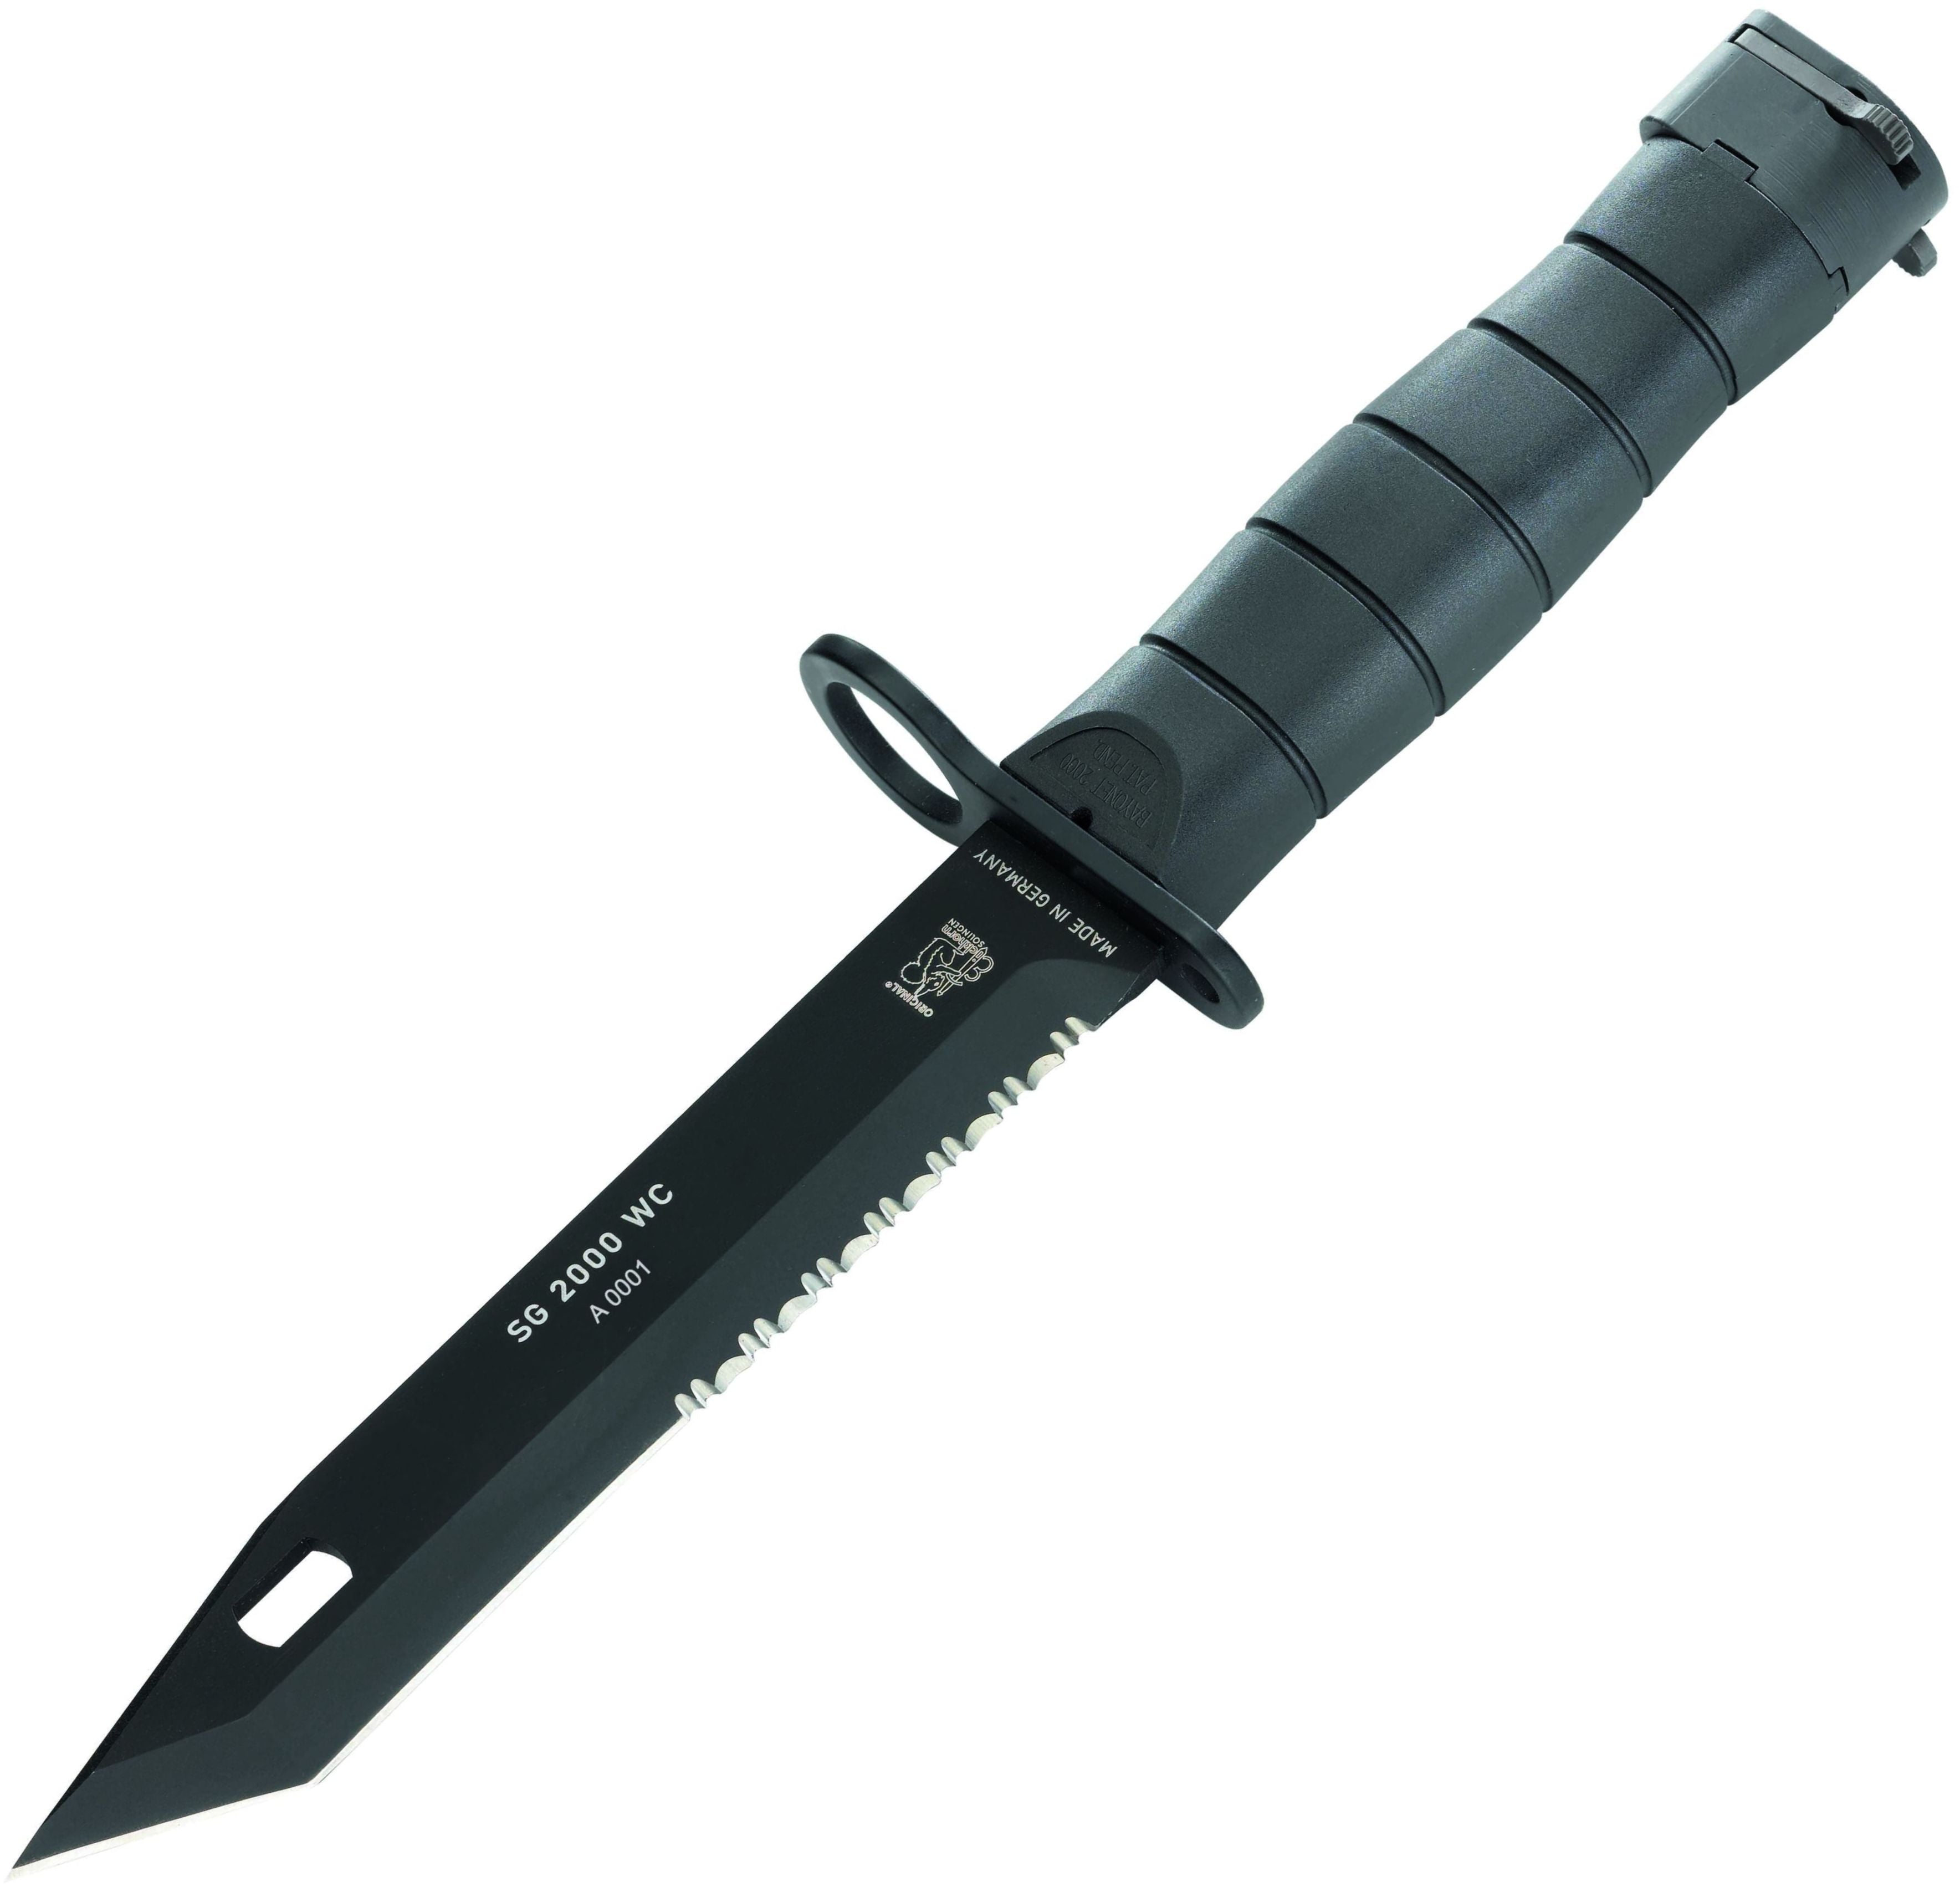 Bayonet SG 2000 with wire cutter